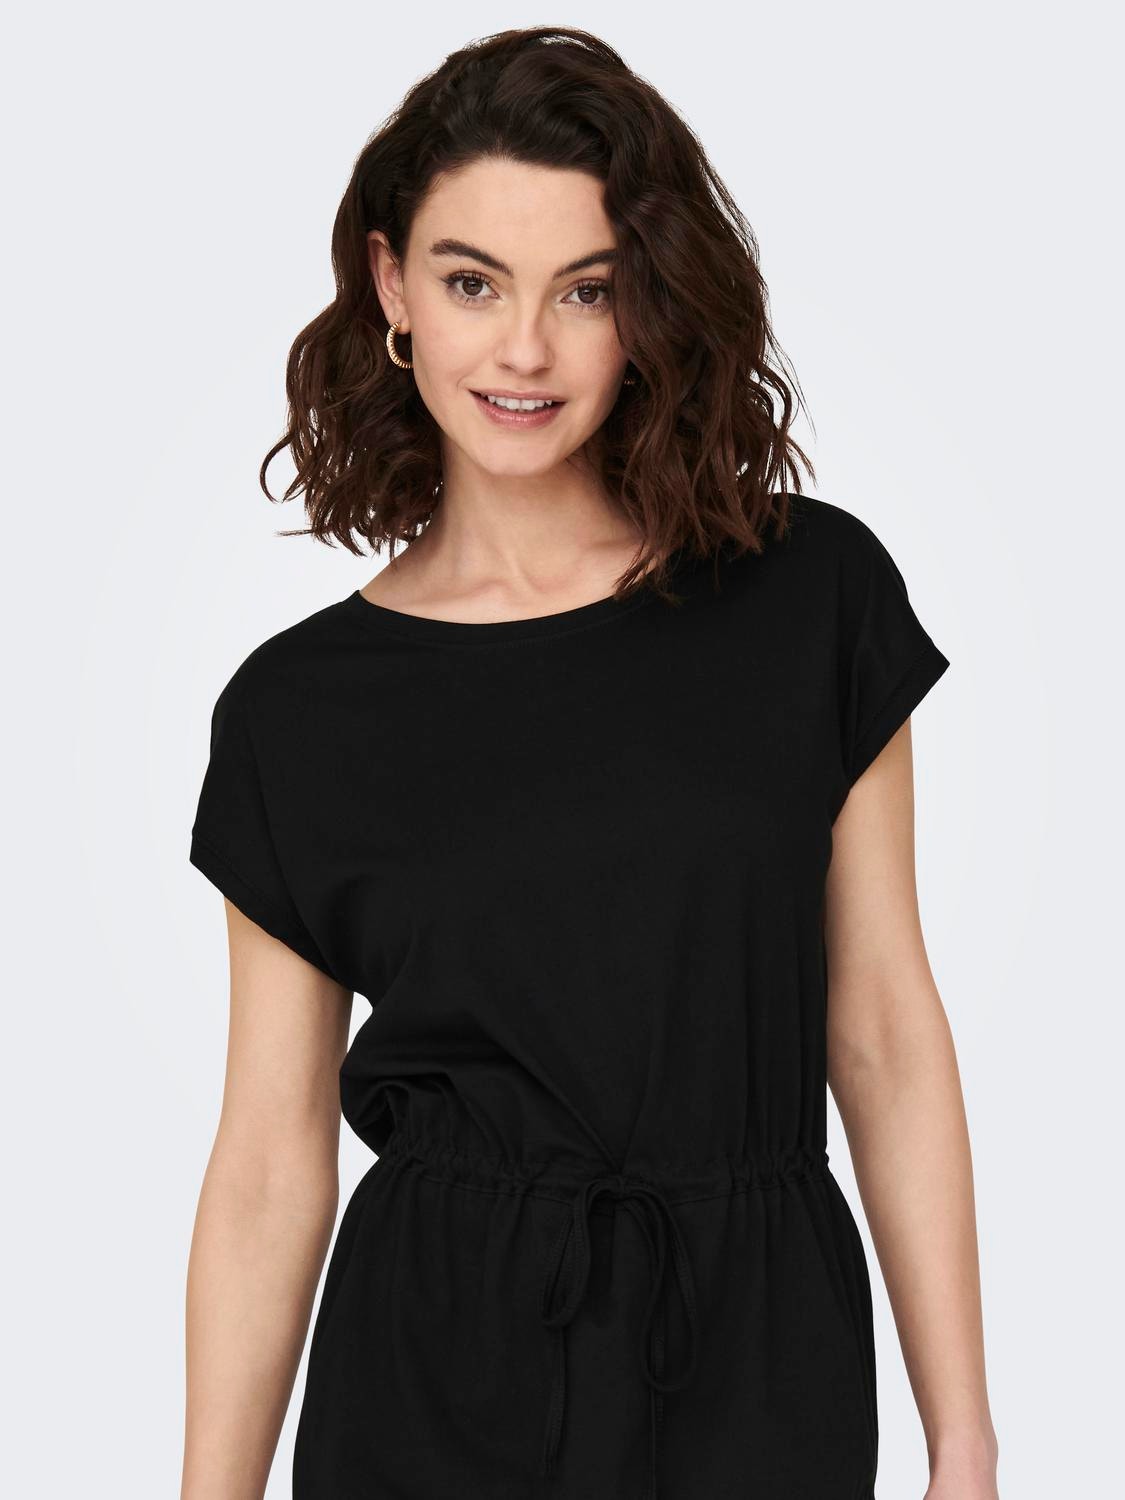 ONLY Ample Robe à manches courtes -Black - 15153021